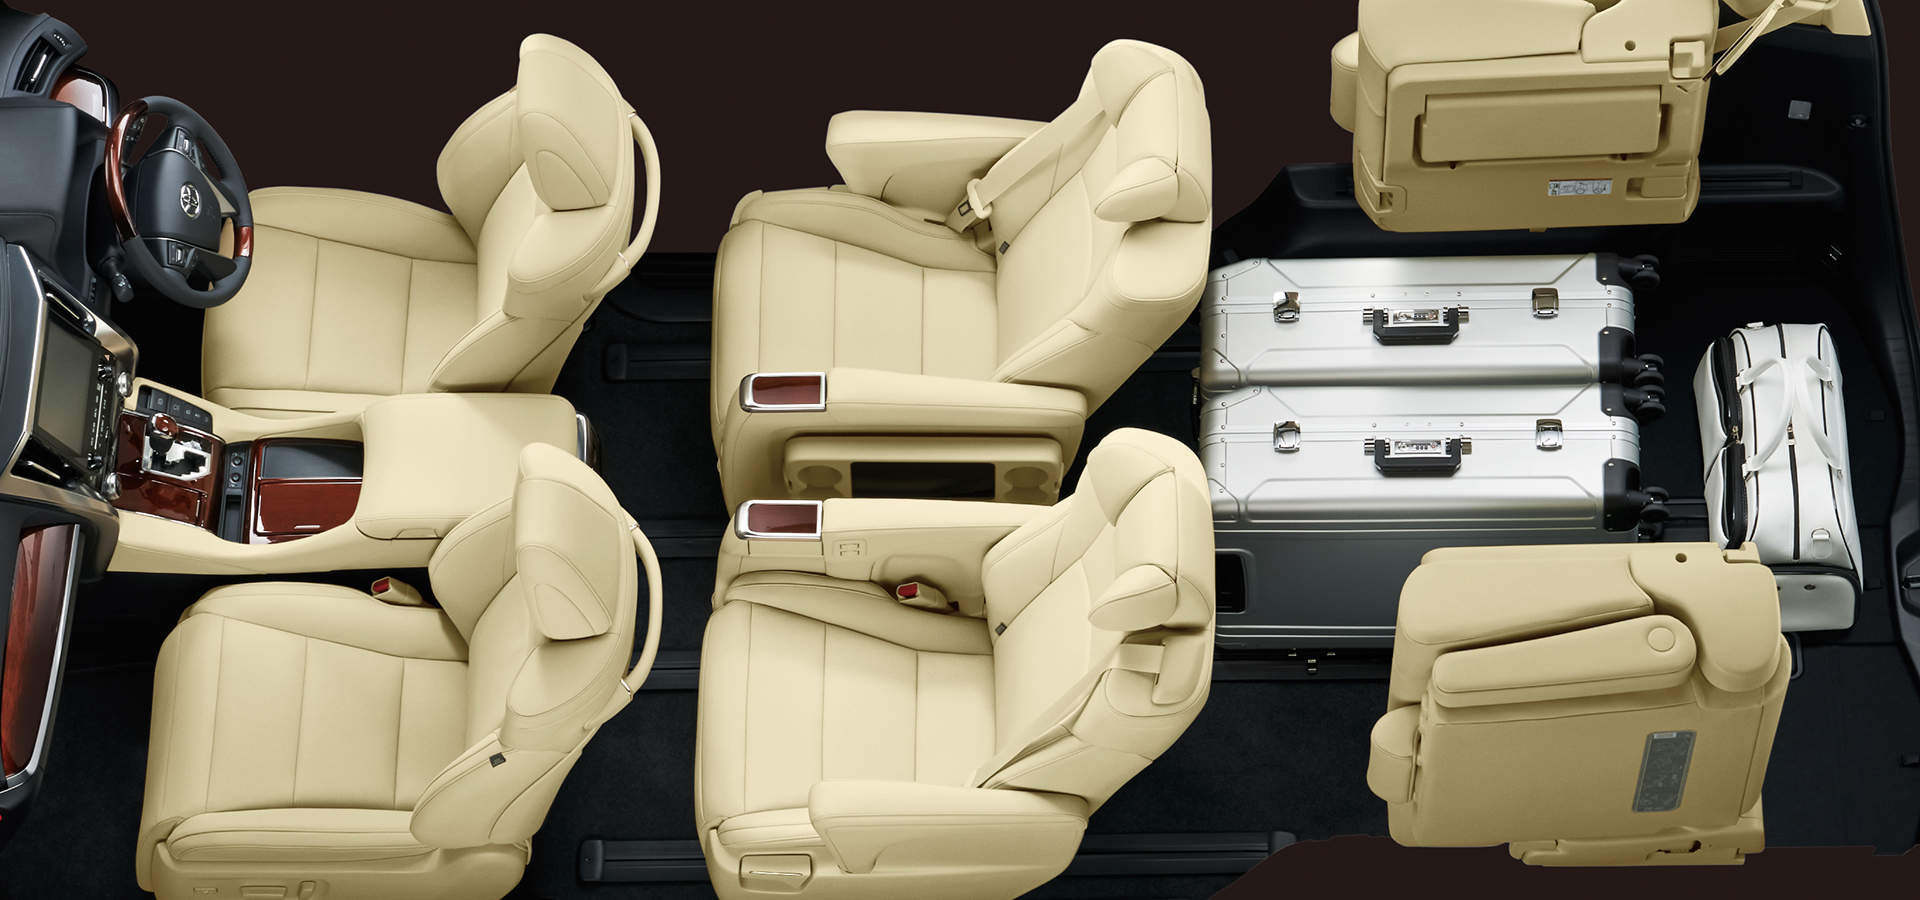 Vellfire seating configuration (third-row seats retracted to maximize cargo space)